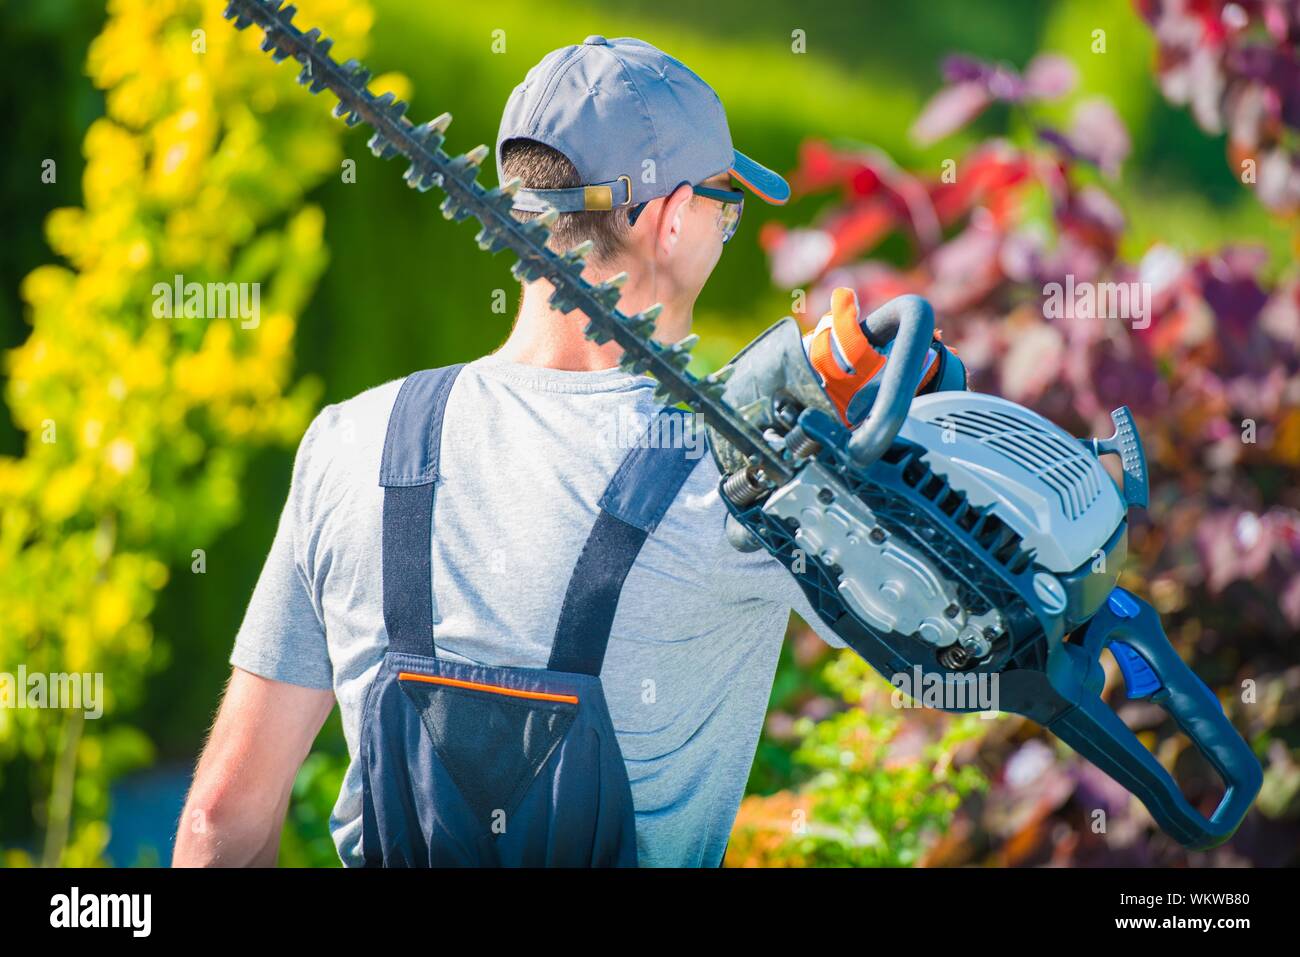 Man Carrying Hedge Trimmer Stock Photo